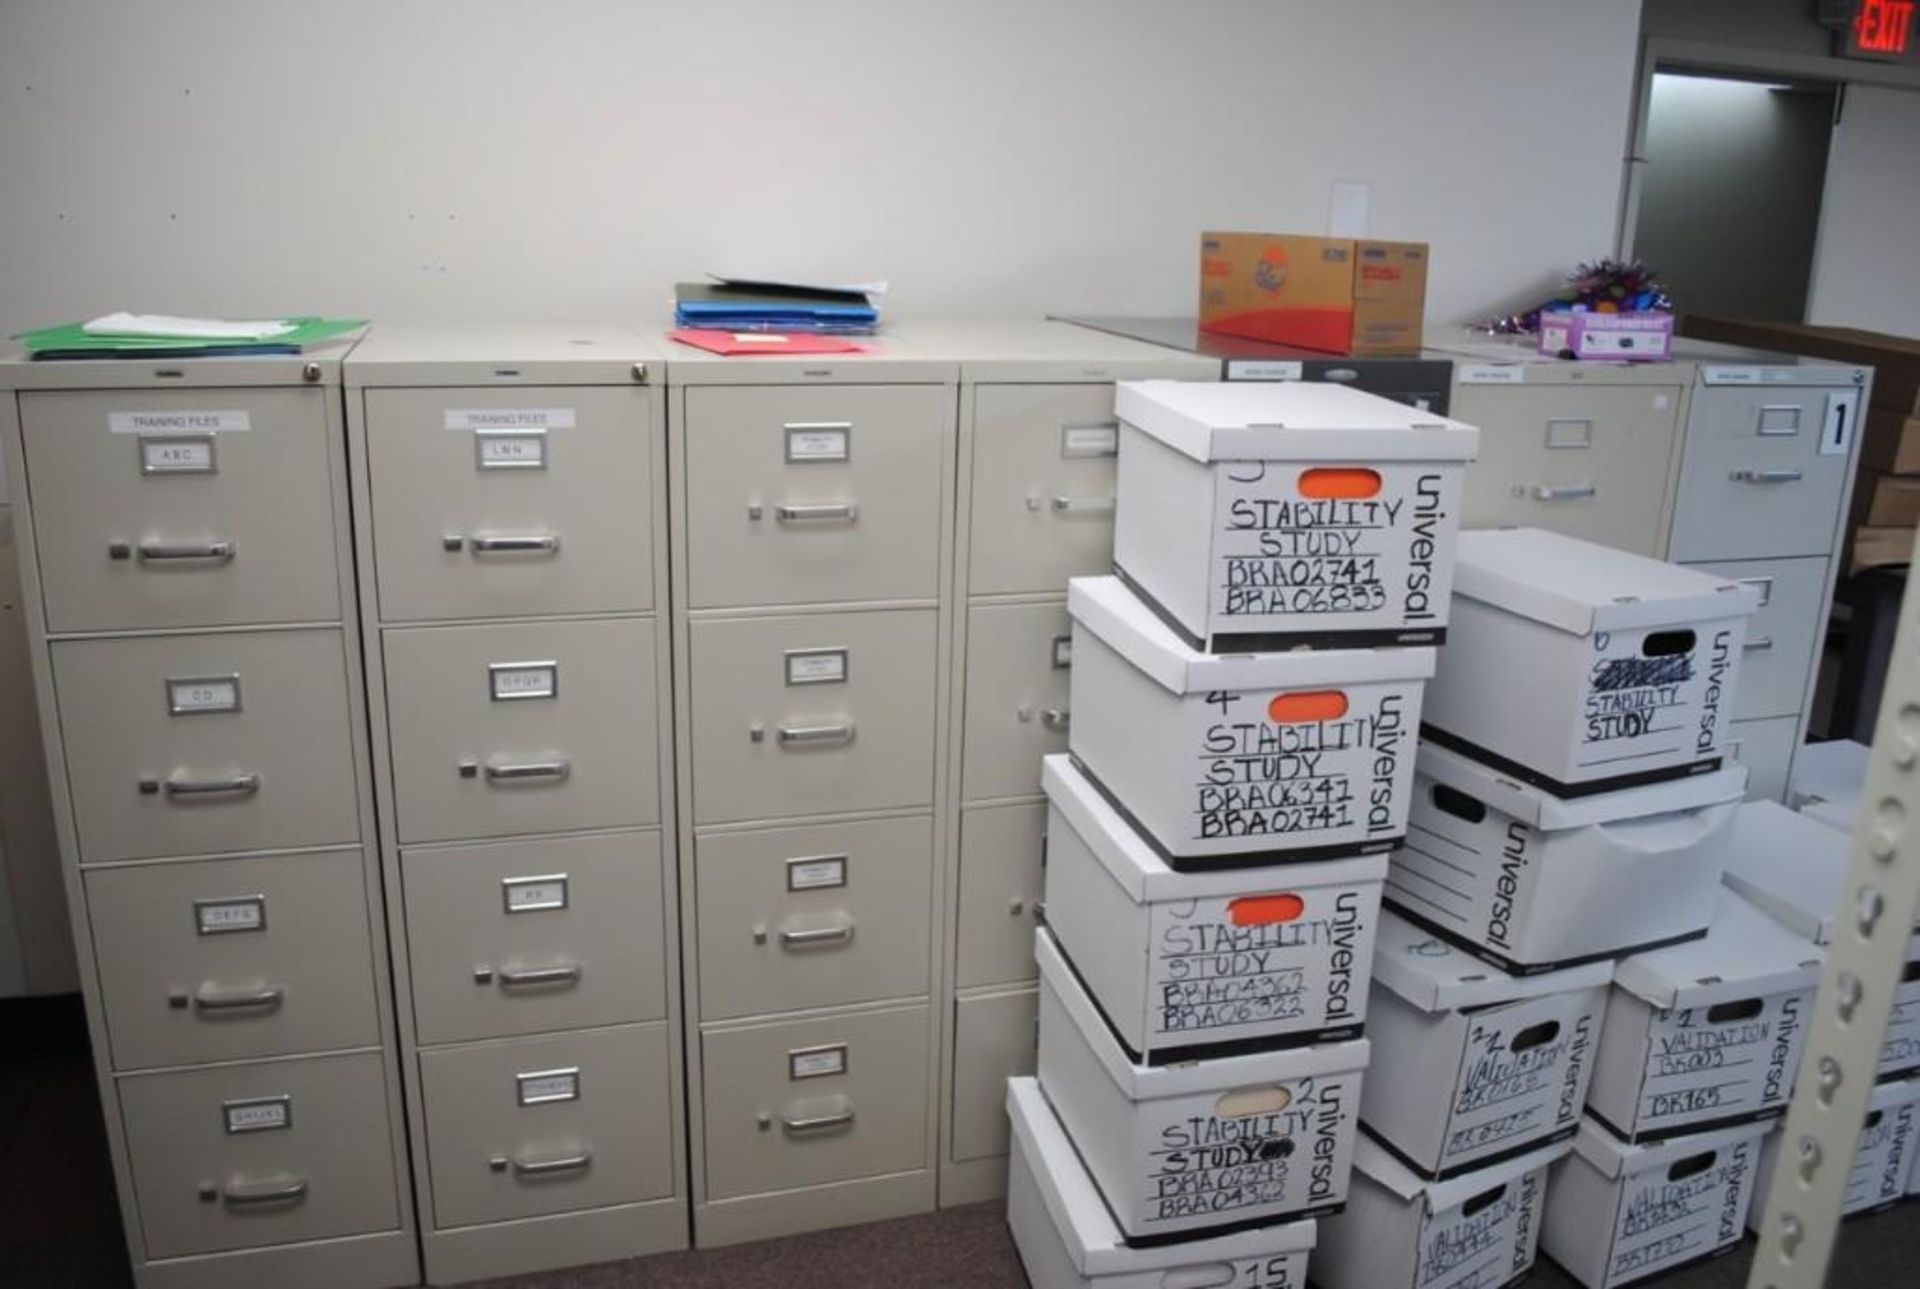 Office Furniture in storage room. - Image 12 of 37